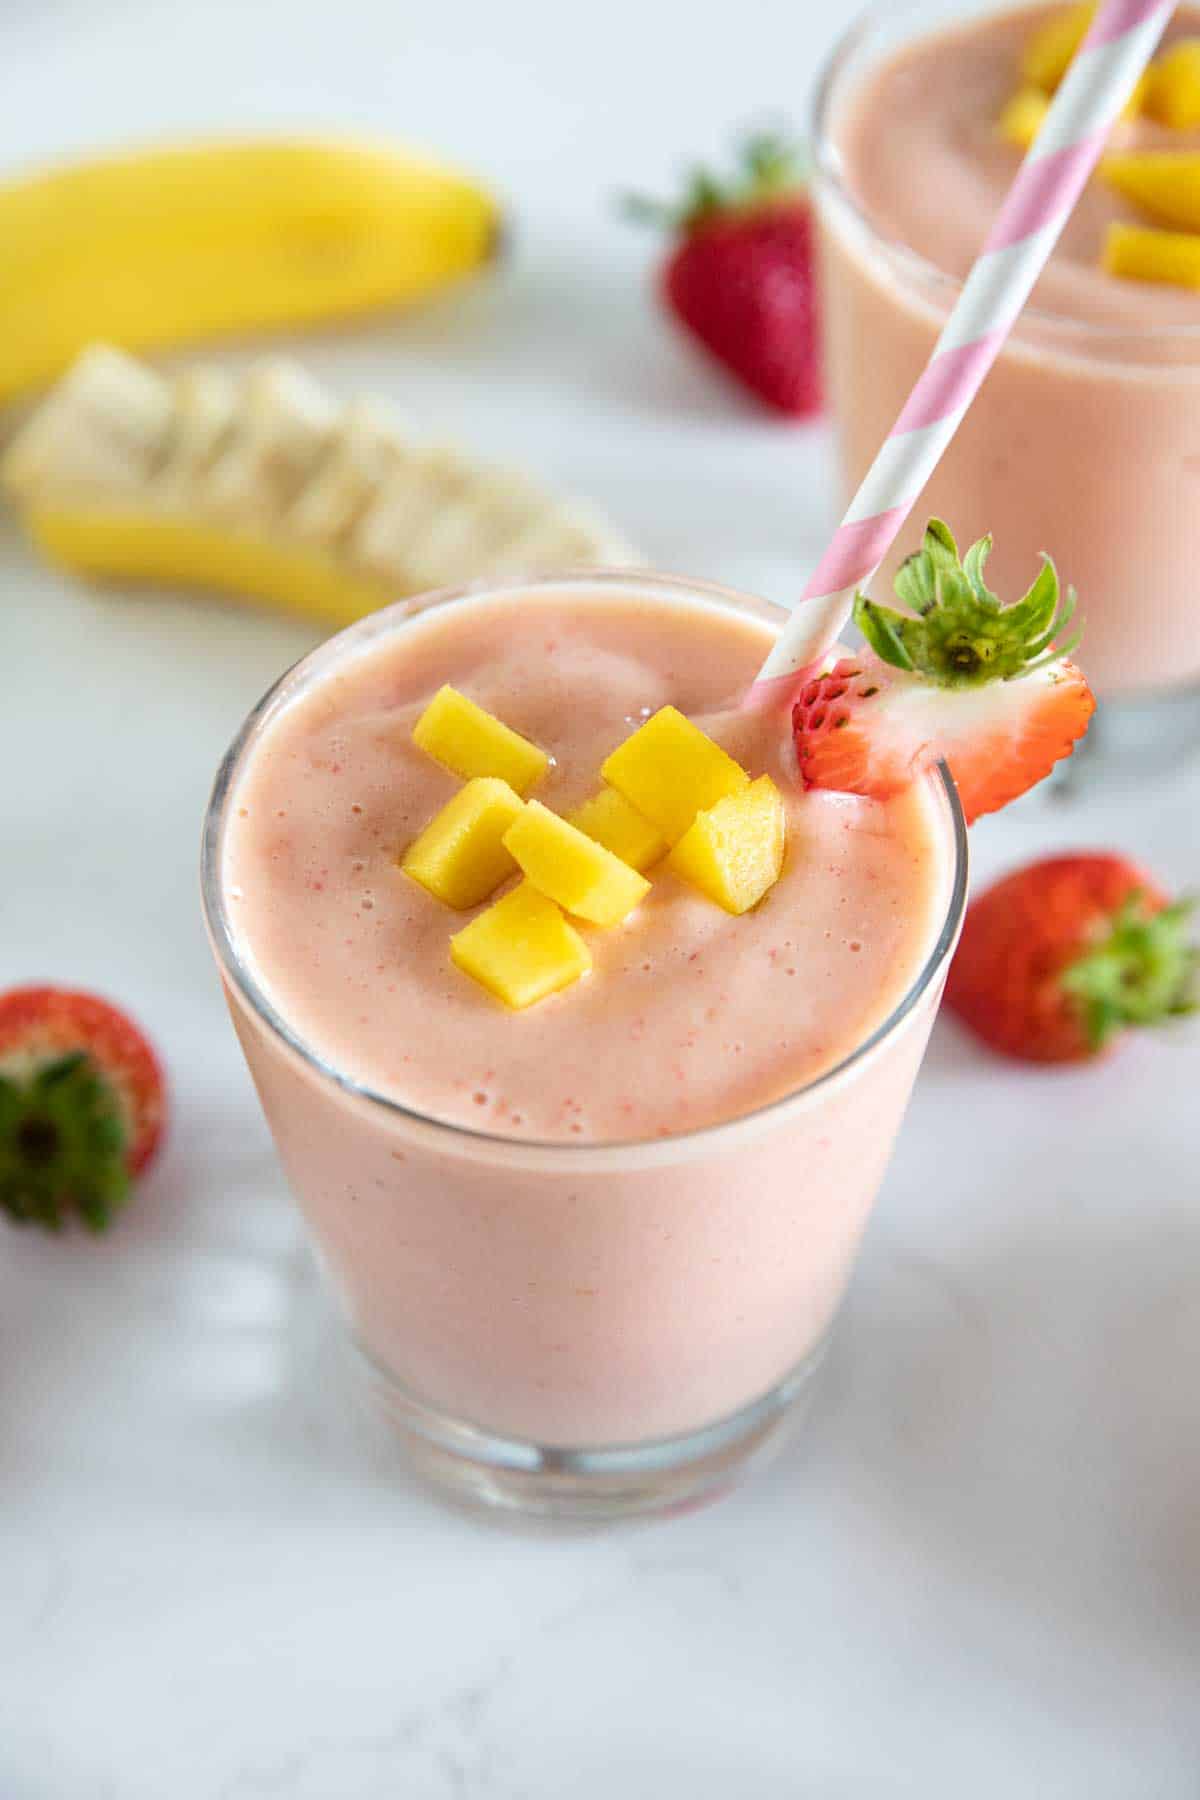 31 Best Add-Ins for Smoothies